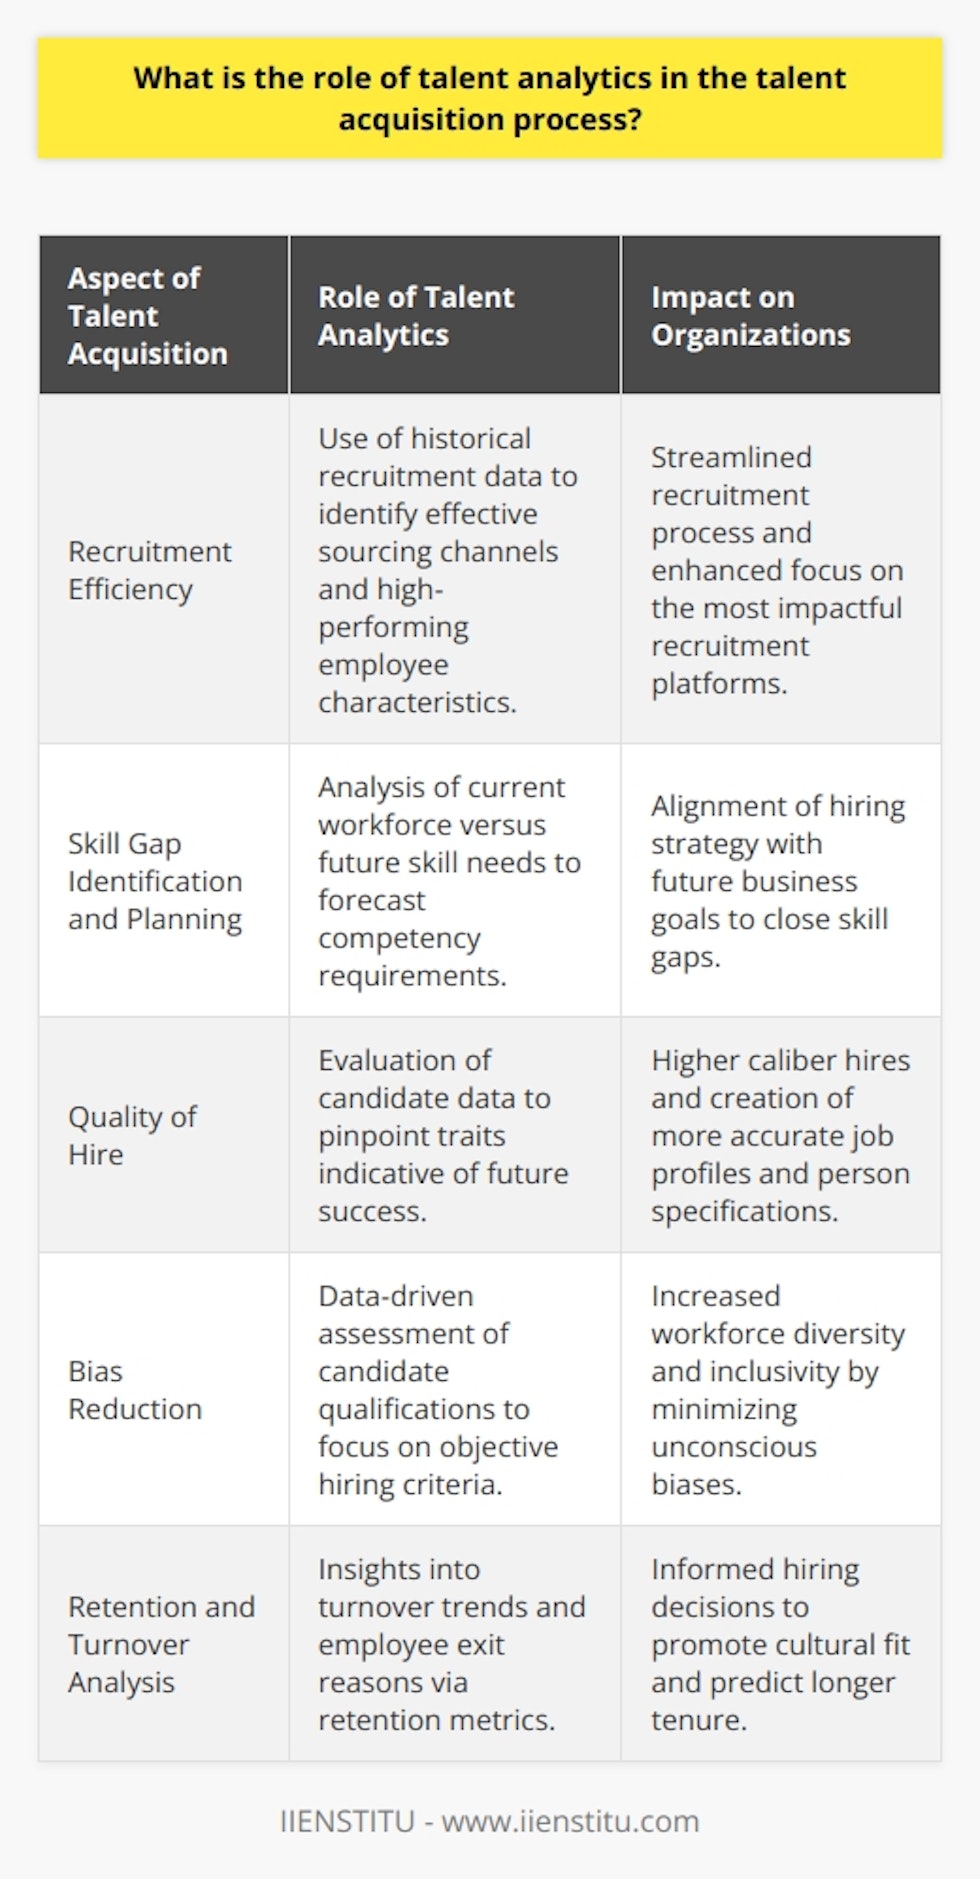 Talent analytics is increasingly becoming a cornerstone of effective talent acquisition strategies, where the use of big data and analytical tools reshapes how organizations recruit, select, and retain top talent.Enhance Recruitment EfficiencyOrganizations can use talent analytics to transform their recruitment efficiency. By analyzing data from previous recruitment cycles, HR teams can assess which sourcing channels yield the best candidates, understand the characteristics of high-performing employees, and thereby streamline their focus on the most effective recruitment platforms and methodologies.Identifying Skill Gaps and PlanningData regarding the current workforce and the skills required for future success allows companies to identify skill gaps and align their talent acquisition process accordingly. Analytics helps in strategic workforce planning by forecasting the competencies needed, which in turn ensures that new hires meet future business requirements.Improving Quality of HireThrough talent analytics, companies can improve the quality of hire by using data to determine which candidates are likely to succeed. This can be based on the analysis of top performers' traits within an organization or looking at a wider industry benchmark. Analytics also supports organizations in creating more accurate job profiles and person specifications which resonate with high caliber candidates.Bias Reduction in HiringOne of the most significant advantages of talent analytics is its ability to reduce unconscious biases in the hiring process. By applying data-driven methods to assess candidates' skills, experience, and potential, companies can focus on objective criteria rather than subjective judgments, which can help foster diversity and inclusivity in the workforce.Retention and Turnover AnalysisRetention metrics provided by talent analytics give insight into turnover trends and potential reasons behind them. Understanding why employees leave can inform the talent acquisition process by highlighting the need for certain cultural fits or specific qualities that might predict longer employee tenure.Strategic Talent Acquisition with IIENSTITUEducational organizations like IIENSTITU provide programs that delve into the intricacies of talent analytics, empowering professionals with knowledge and skills to leverage data in making strategic talent acquisition decisions. By taking courses from a reputable institution, recruiters and HR professionals can develop the proficiency to apply advanced analytics in every stage of the recruitment process.In conclusion, talent analytics is a powerful ally in the talent acquisition process, providing insights that lead to smarter decisions, better quality hires, improved candidate experiences, and ultimately, a more dynamic workforce that can carry an organization to new heights. Its incorporation into the HR strategy represents not just a trend but a necessary evolution toward an evidence-based approach to talent management.